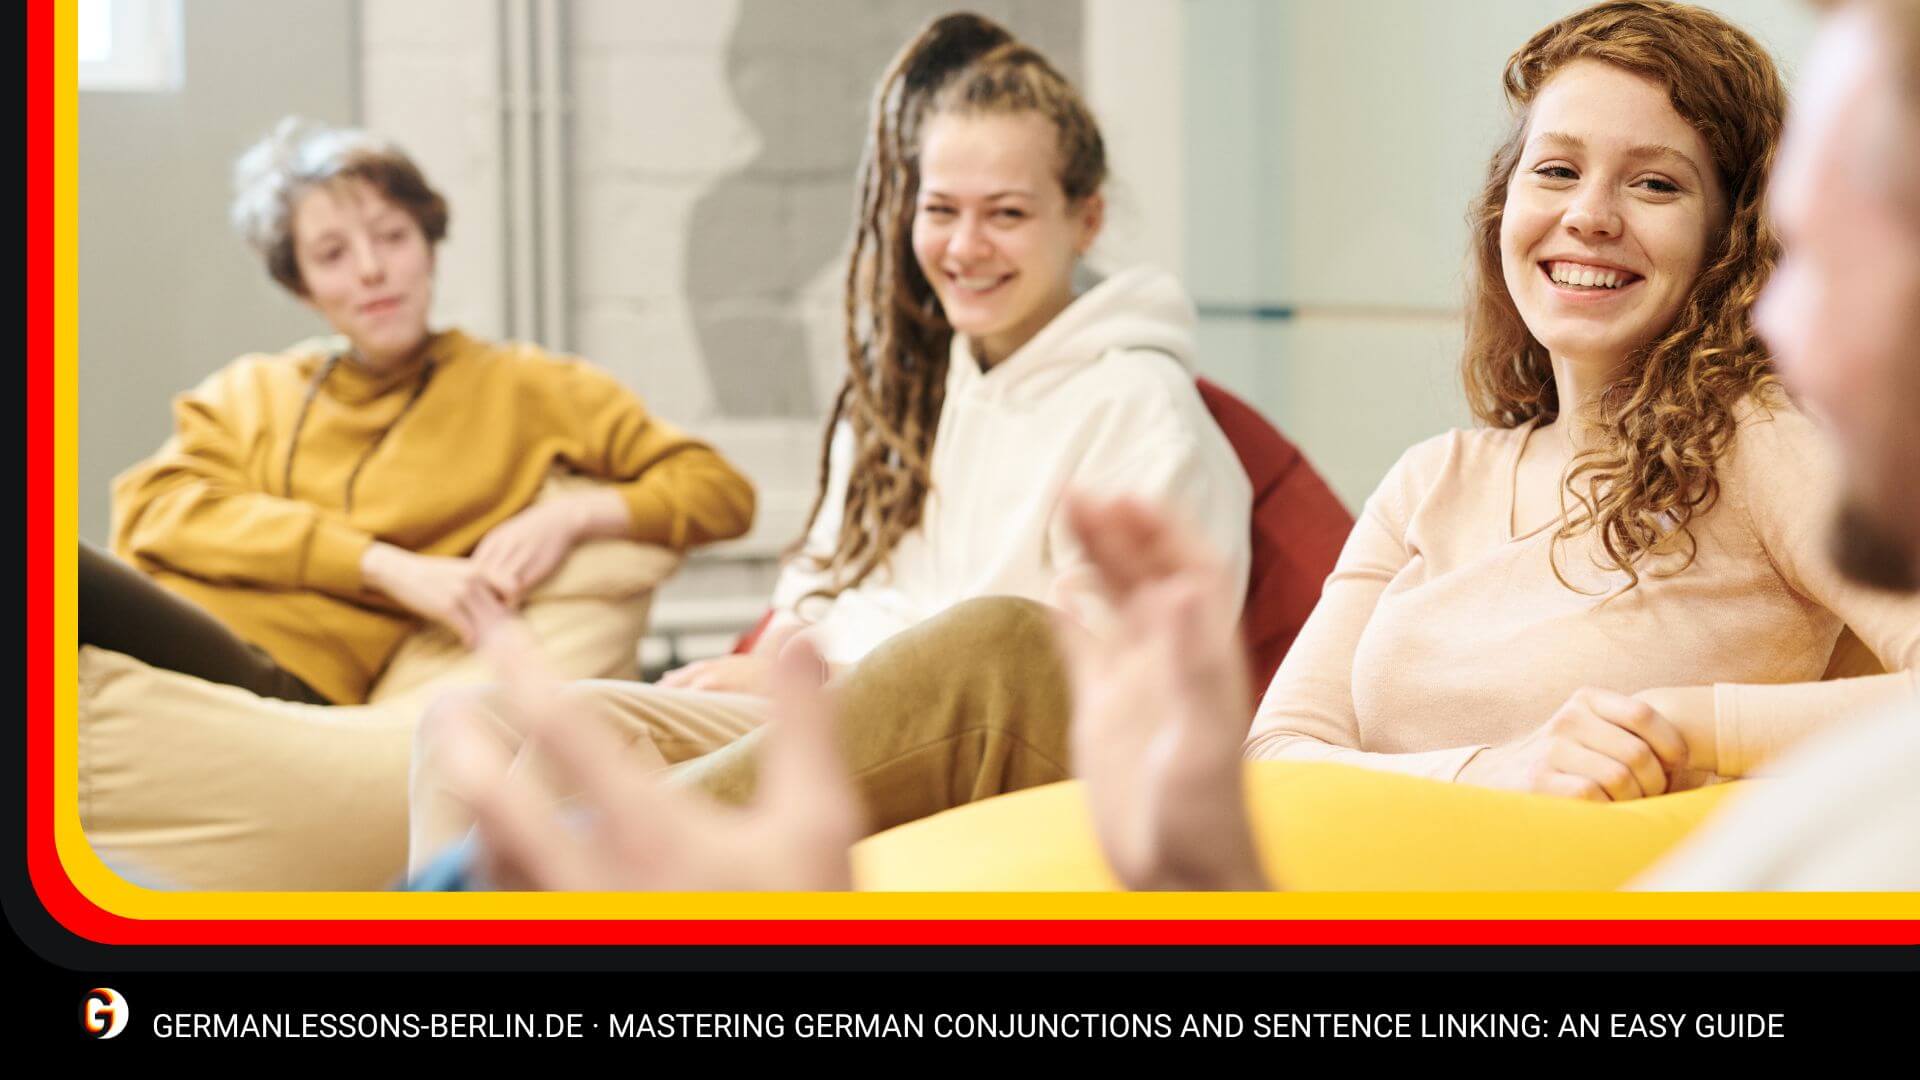 Mastering German Conjunctions and Sentence Linking: An Easy Guide